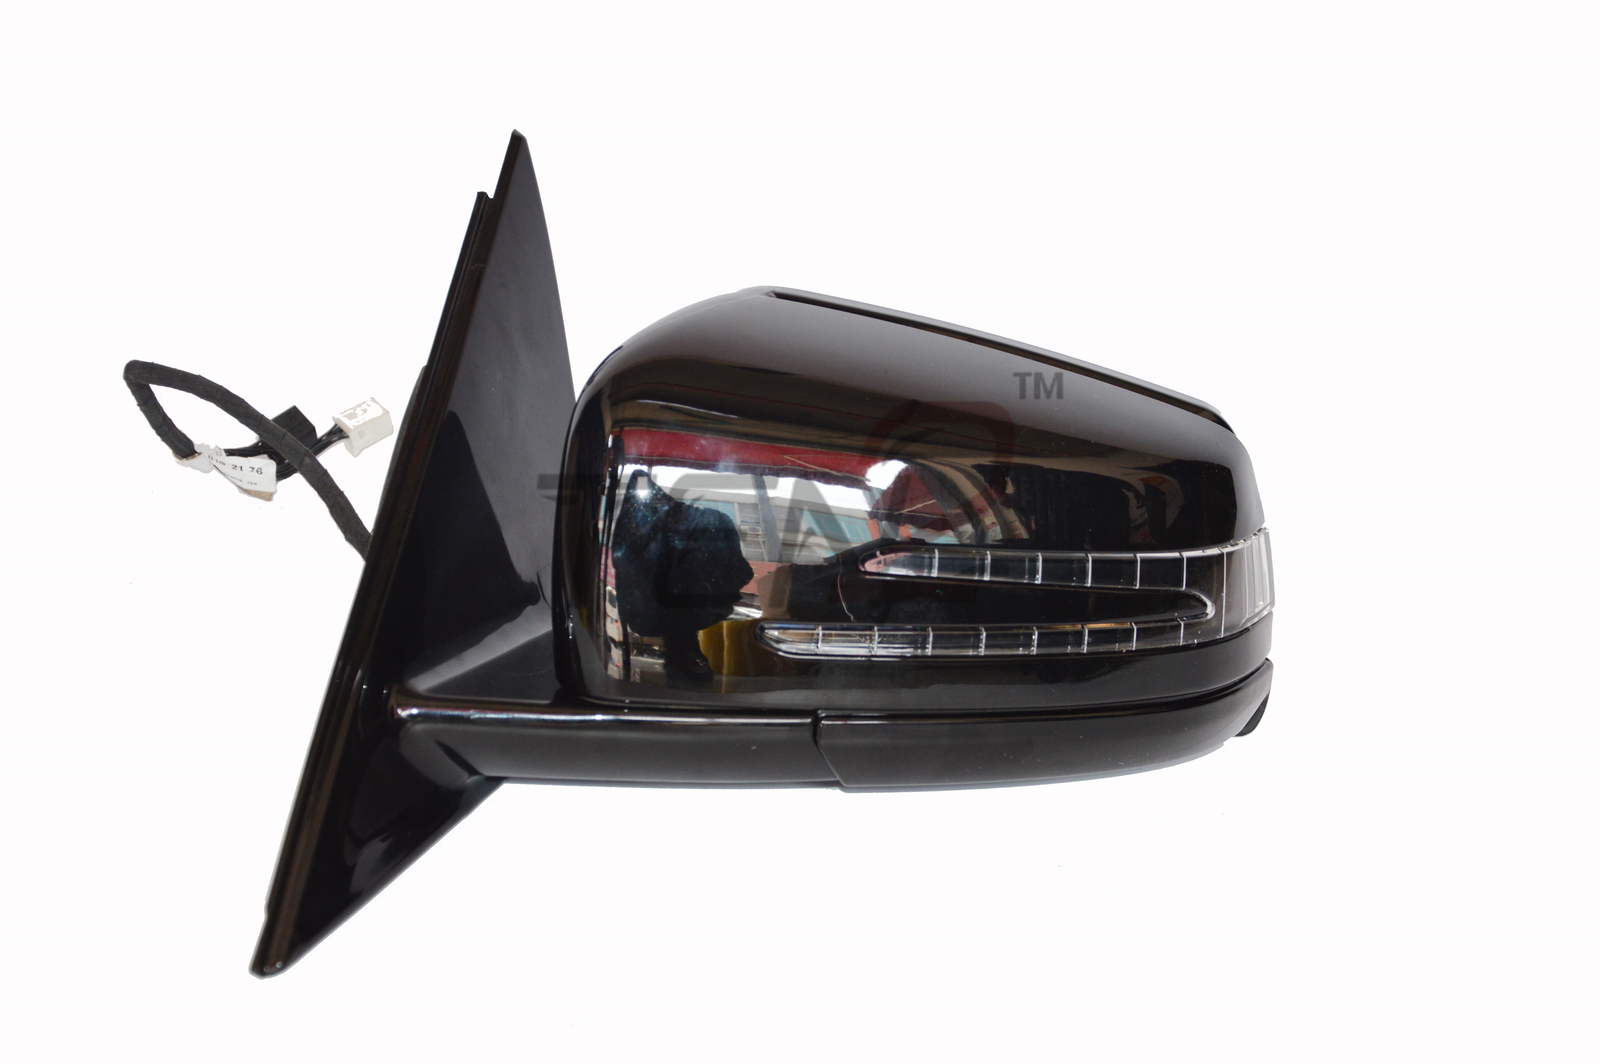 Mercedes Benz C class C200 C180 C300 W204 LEFT SIDE VIEW WING MIRROR A2048102176 - $297.00